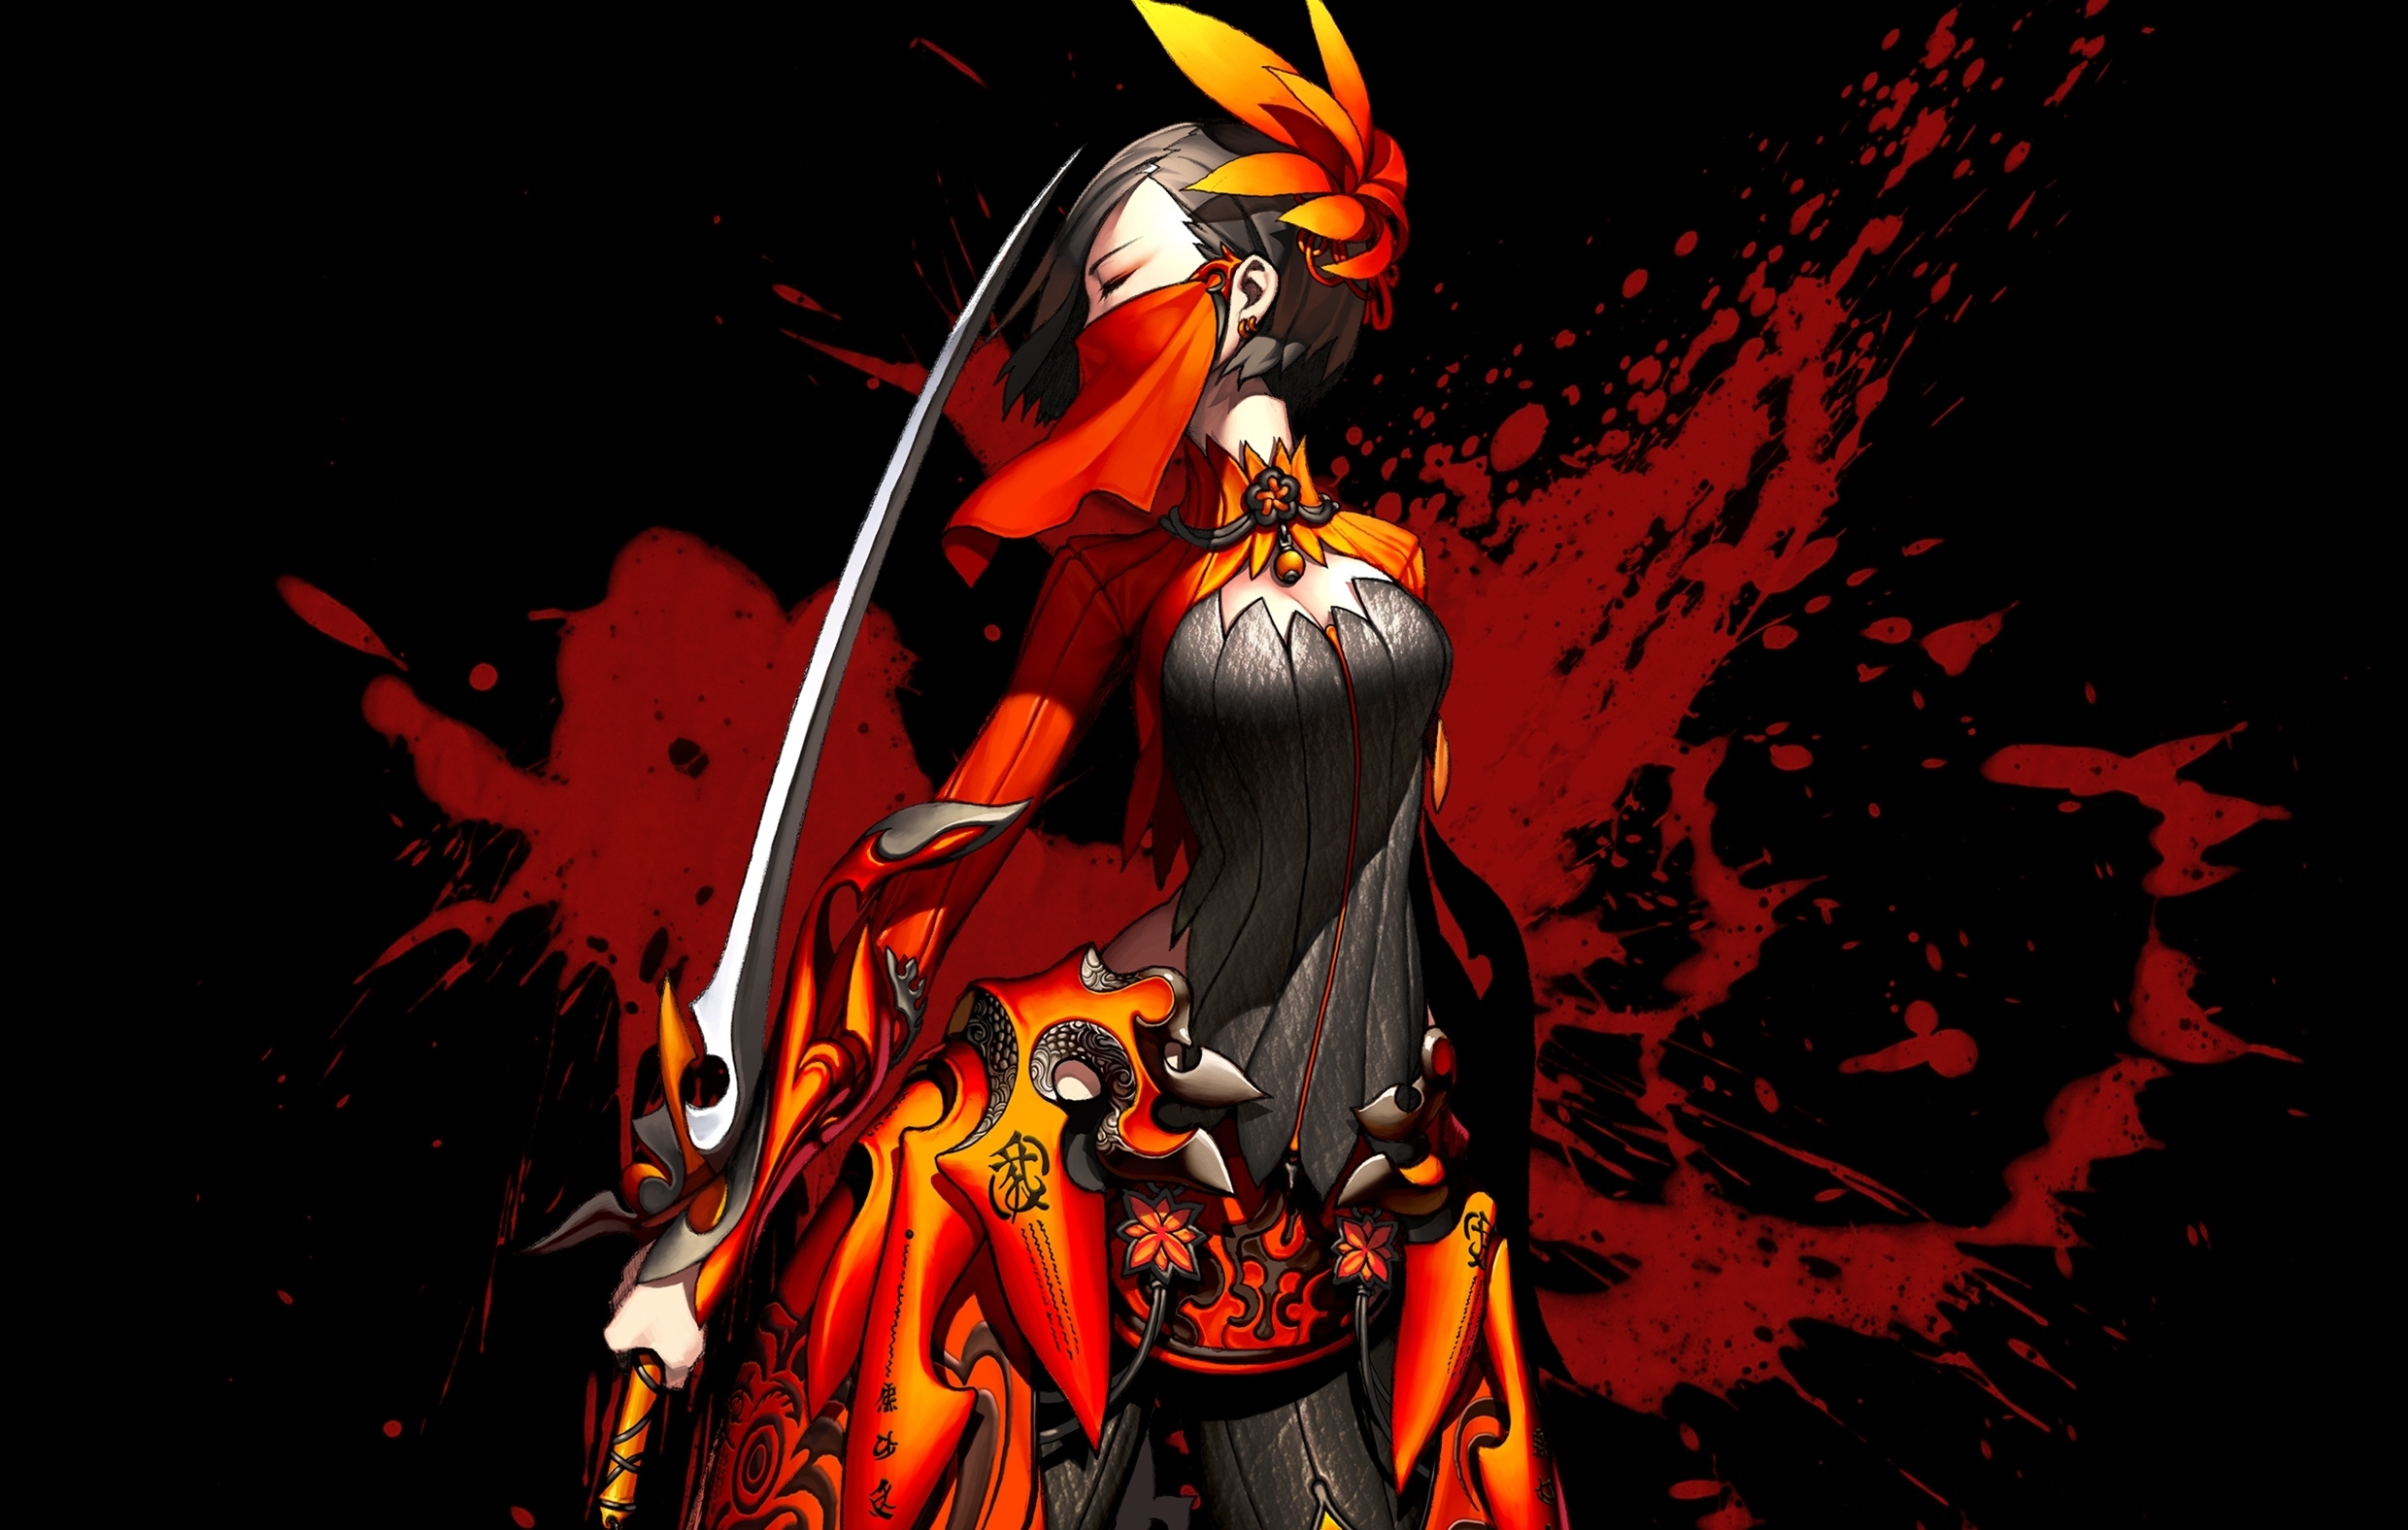 Video Game Blade & Soul HD Wallpaper | Background Image